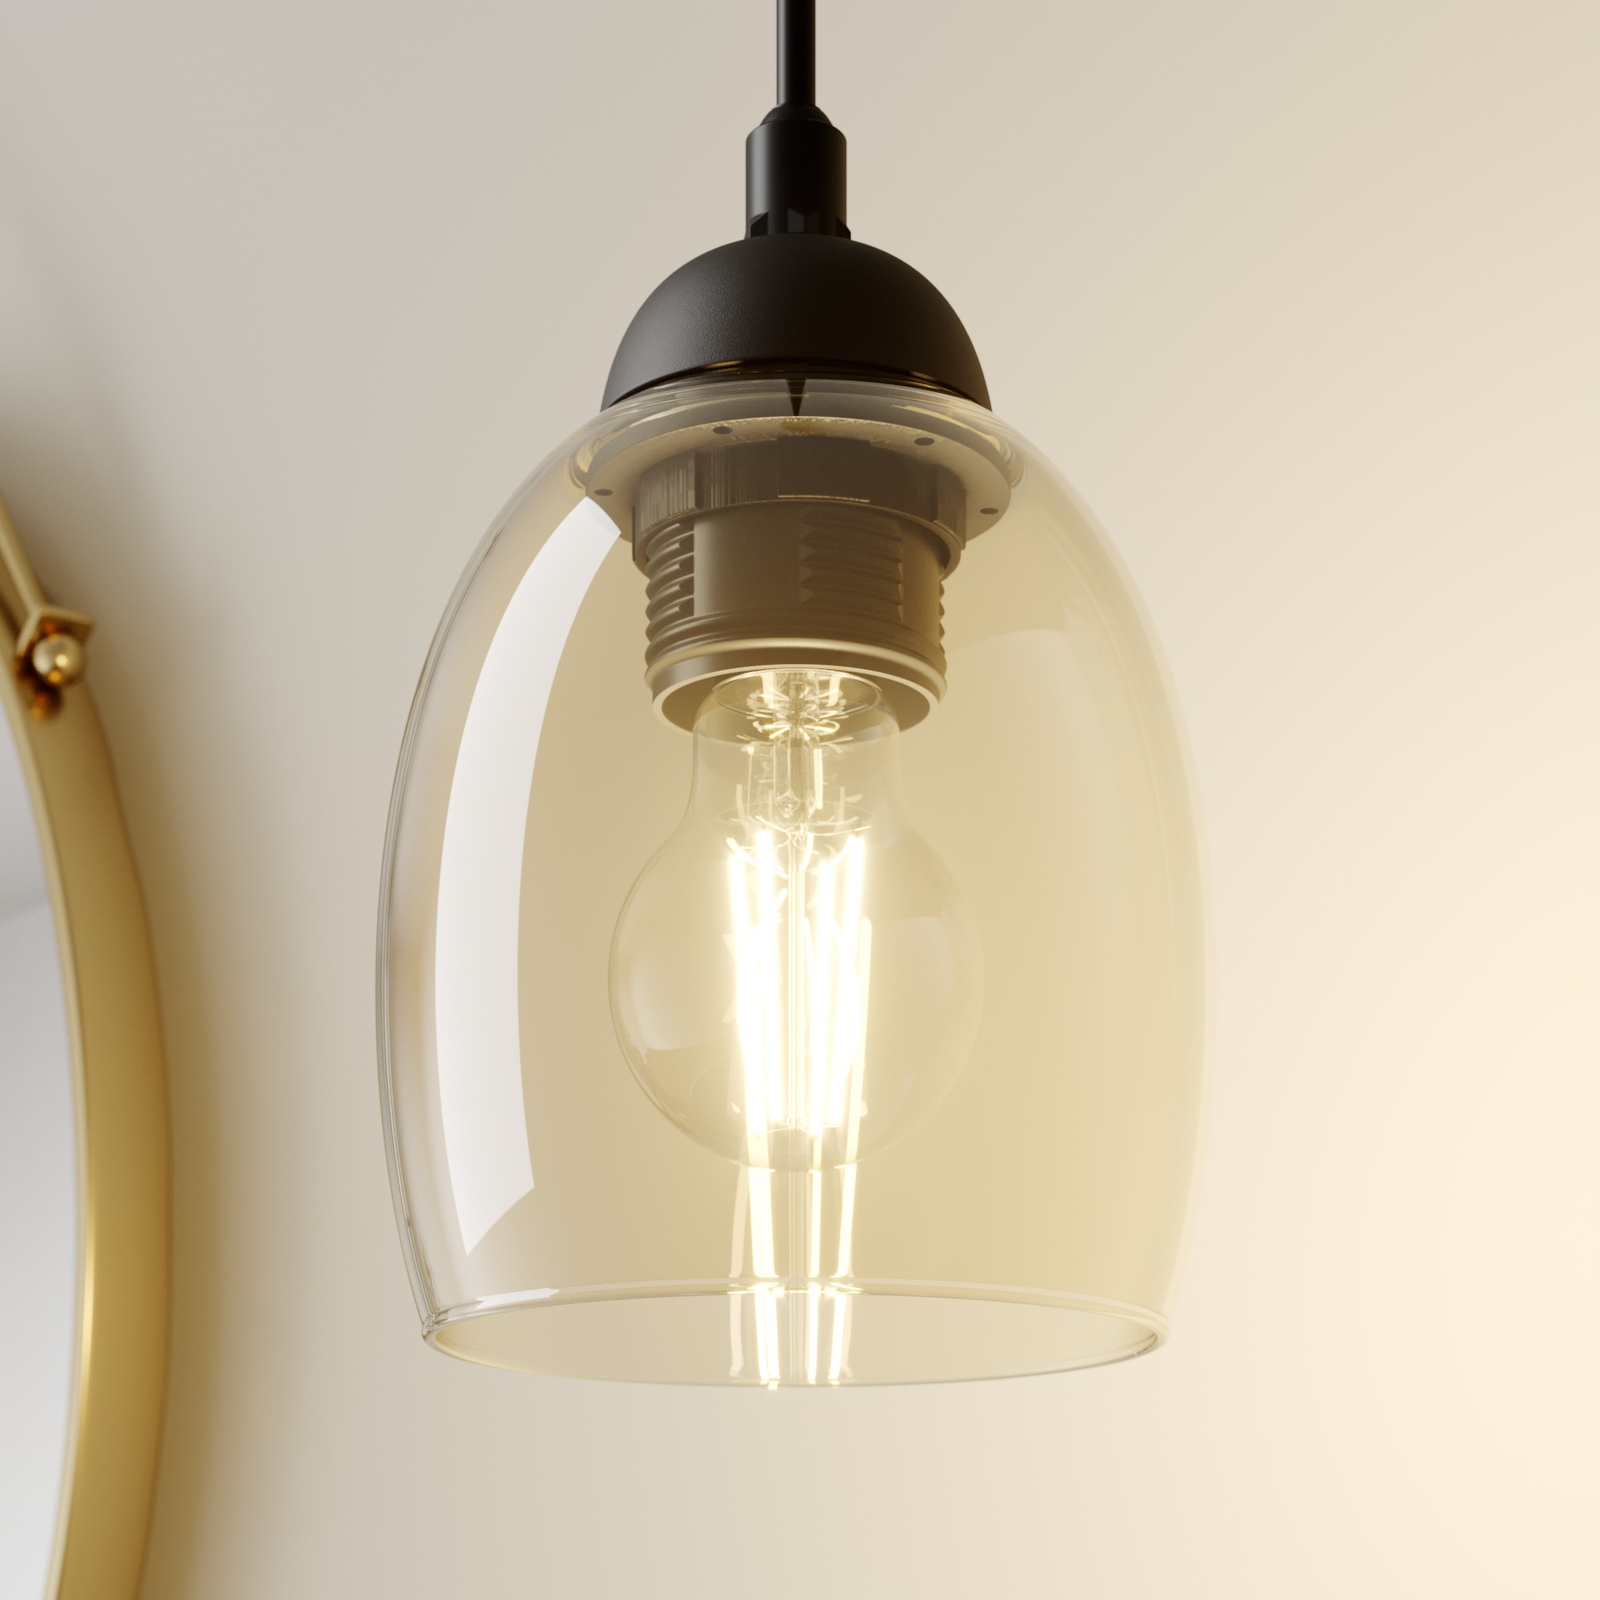 Brilliant hanging light with amber glass lampshade